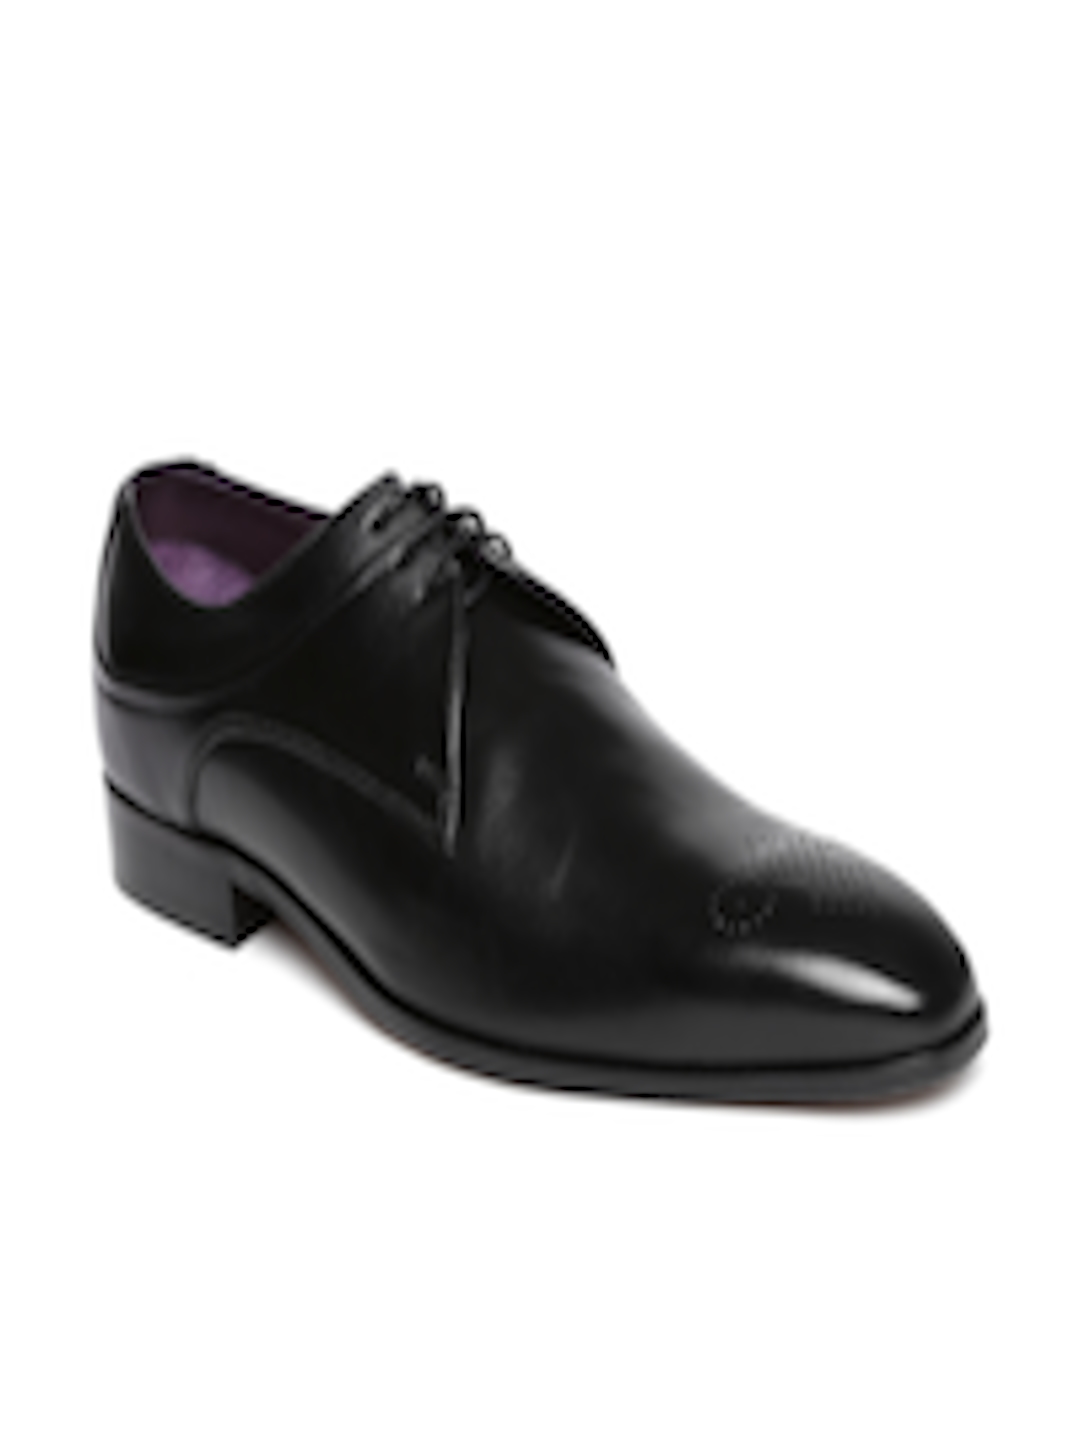 Buy Louis Philippe Men Black Leather Formal Shoes - Formal Shoes for Men 1782074 | Myntra